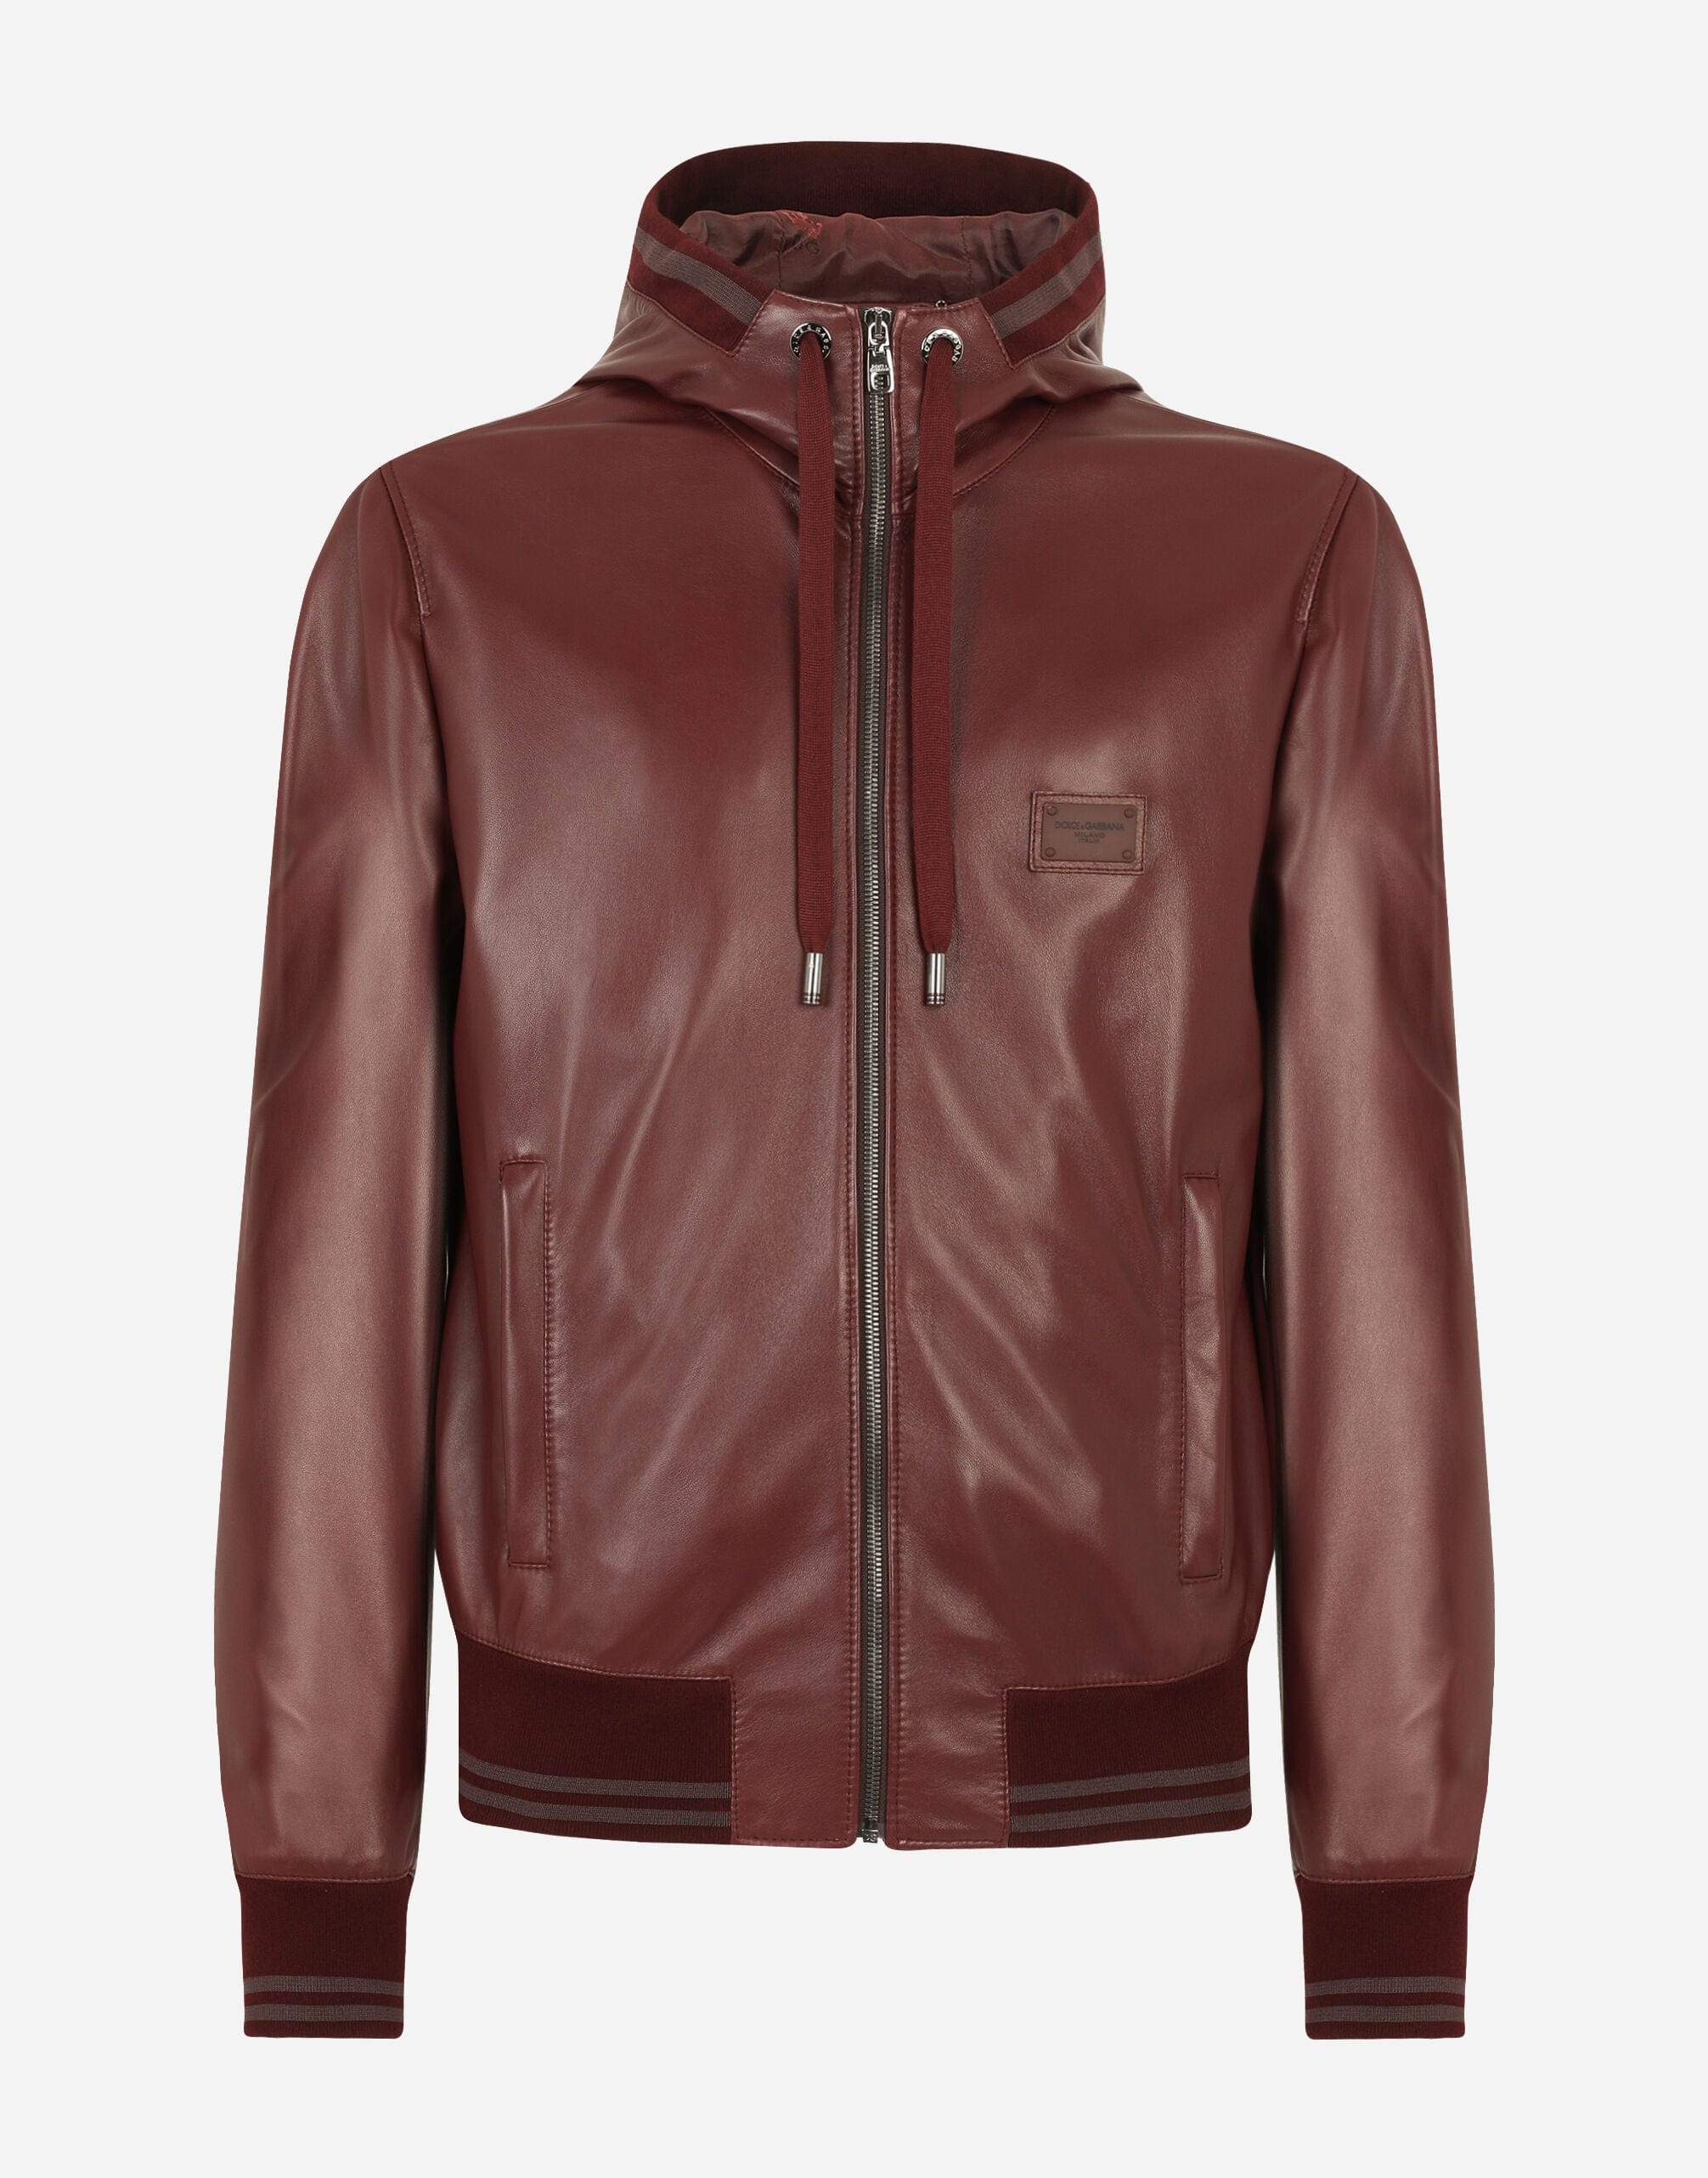 Dolce & Gabbana Leather Jacket With Hood And Branded Plate